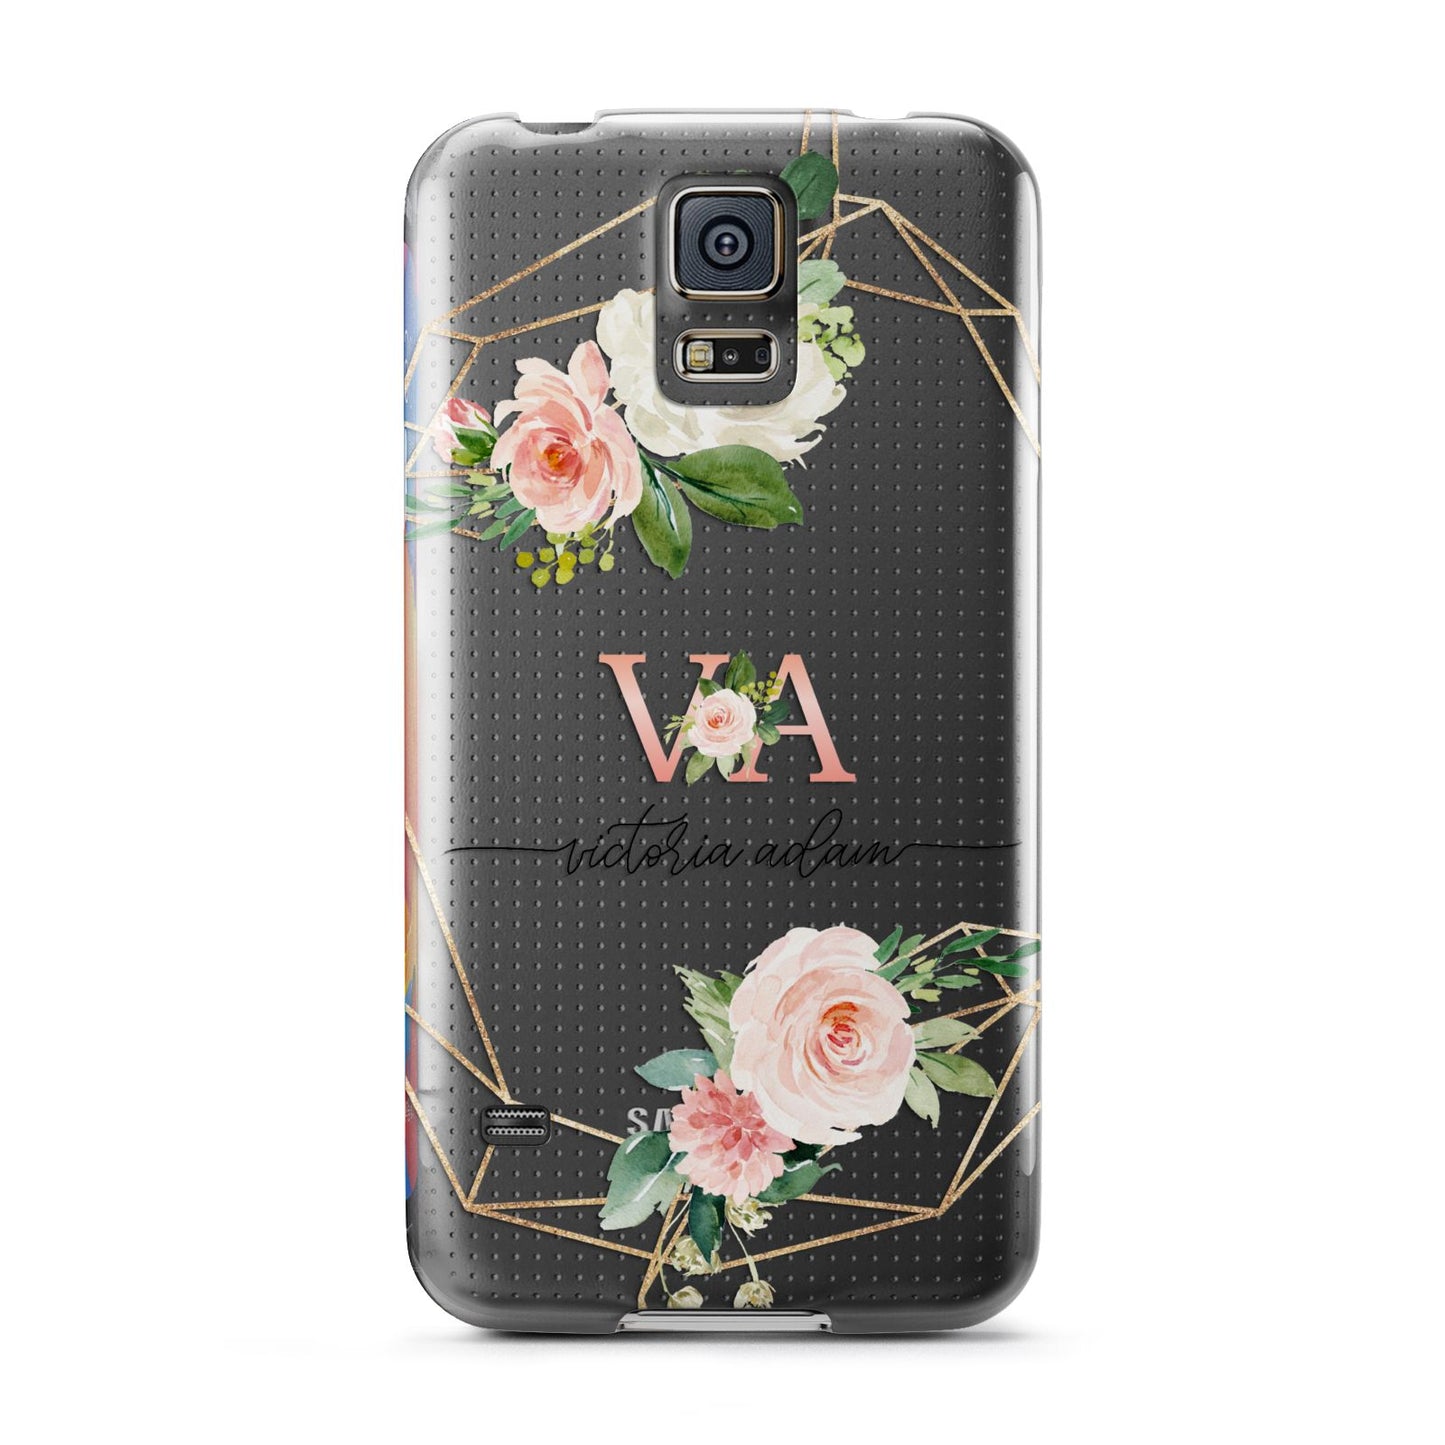 Blush Pink Rose Floral Personalised Samsung Galaxy S5 Case